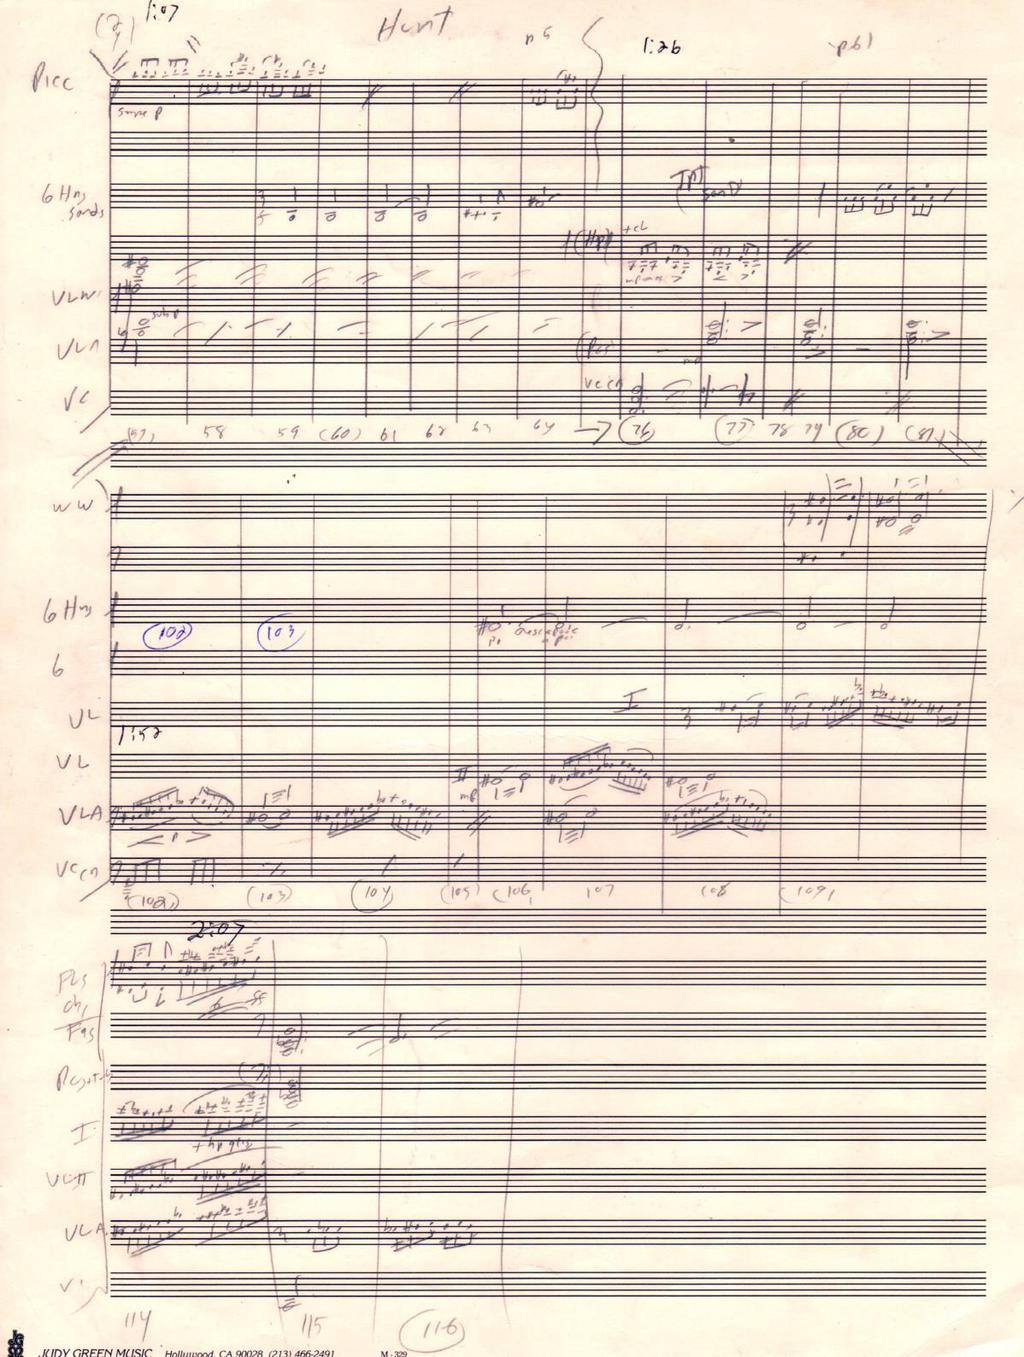 notes tied to next bars, while Pos/tuba play C/Eb/G/B (C min 7 th ) tied to next bars.